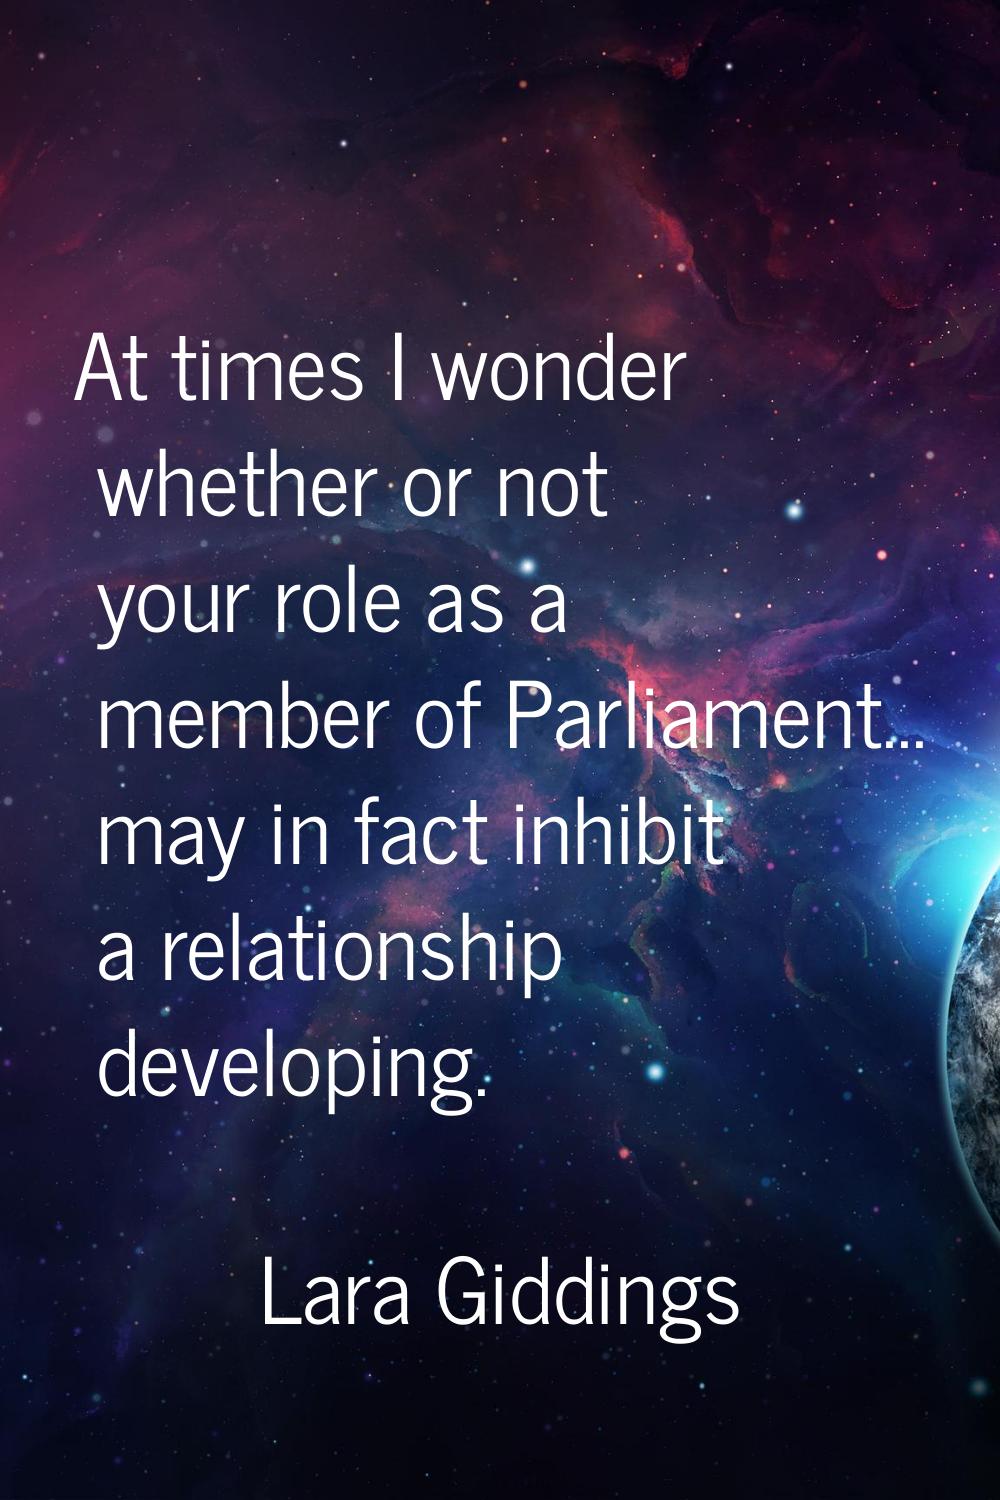 At times I wonder whether or not your role as a member of Parliament... may in fact inhibit a relat